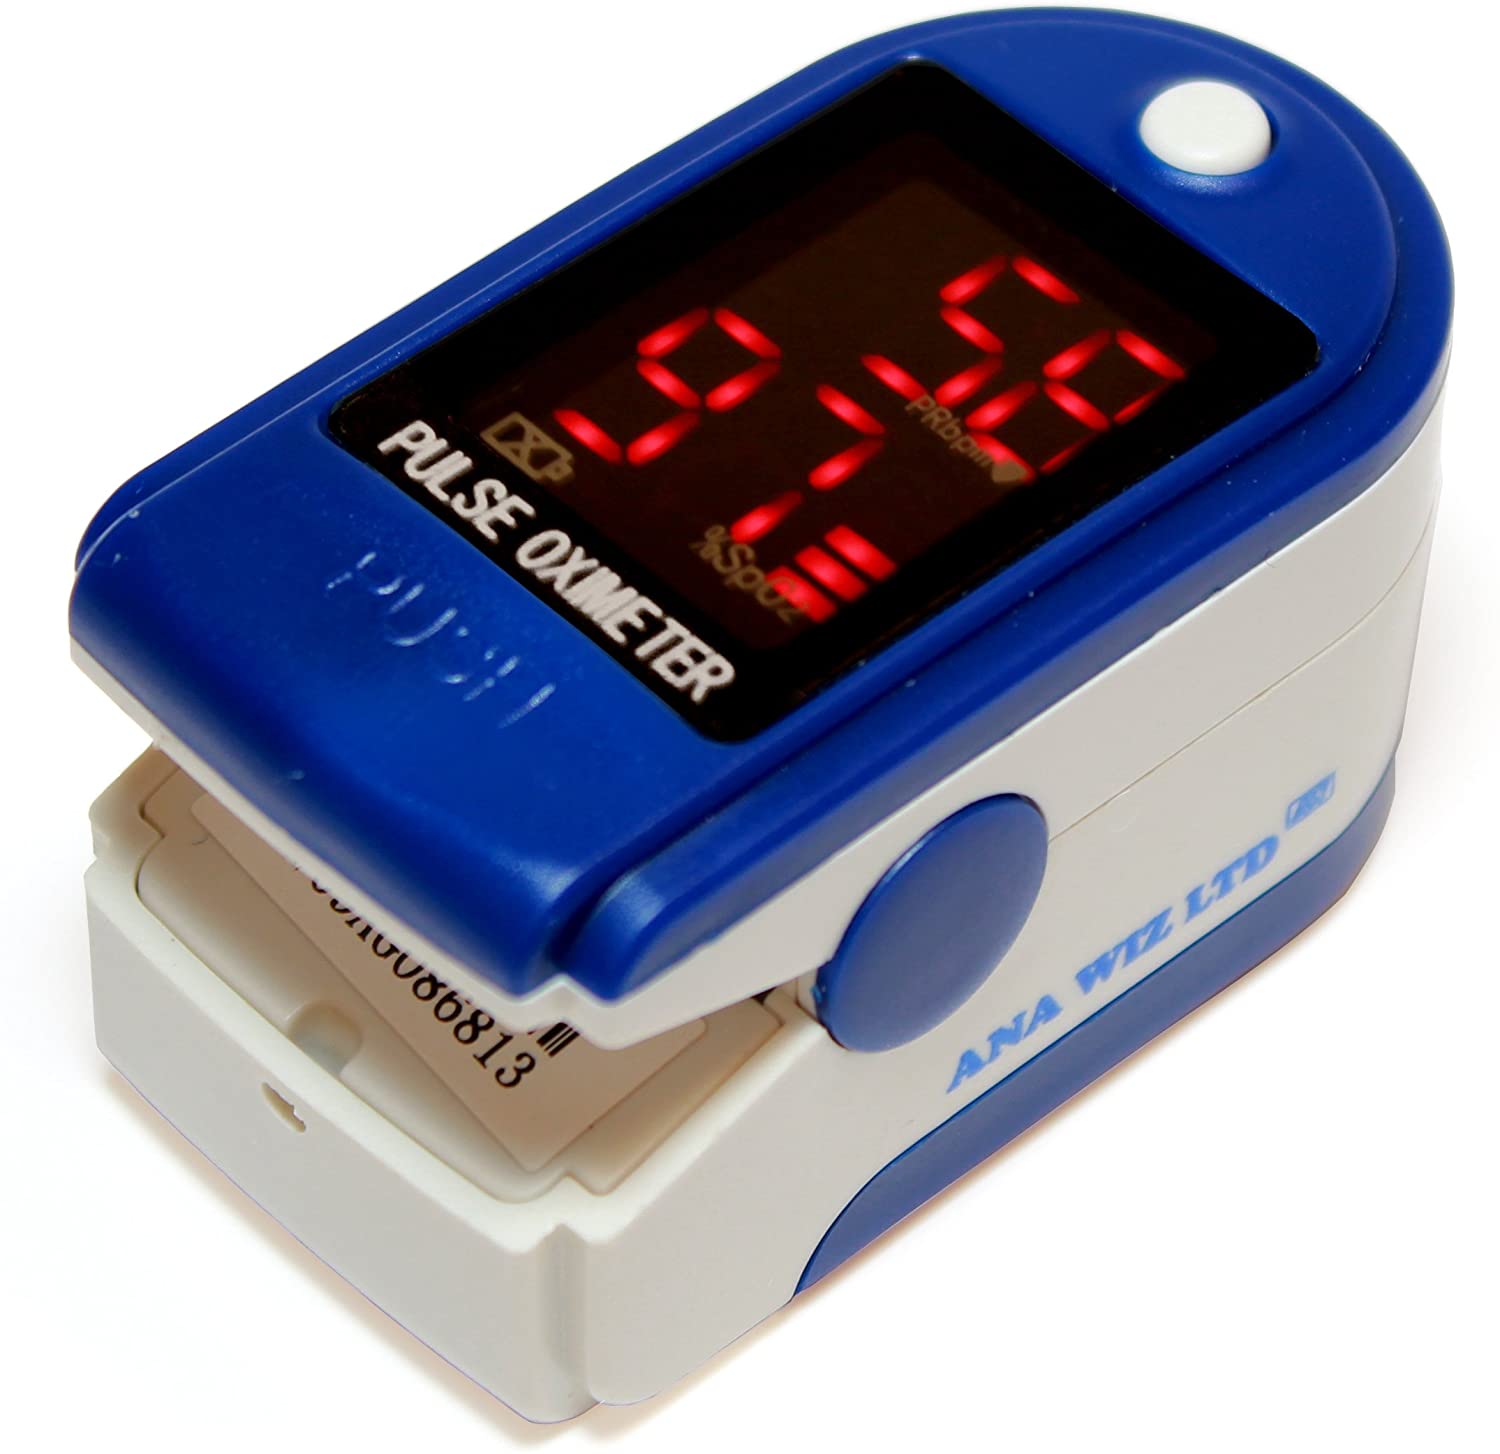 Case of 100 - Anapulse ANP100 Finger Pulse Oximeter With LED Display (Includes Carrycase, Batteries and Lanyard)